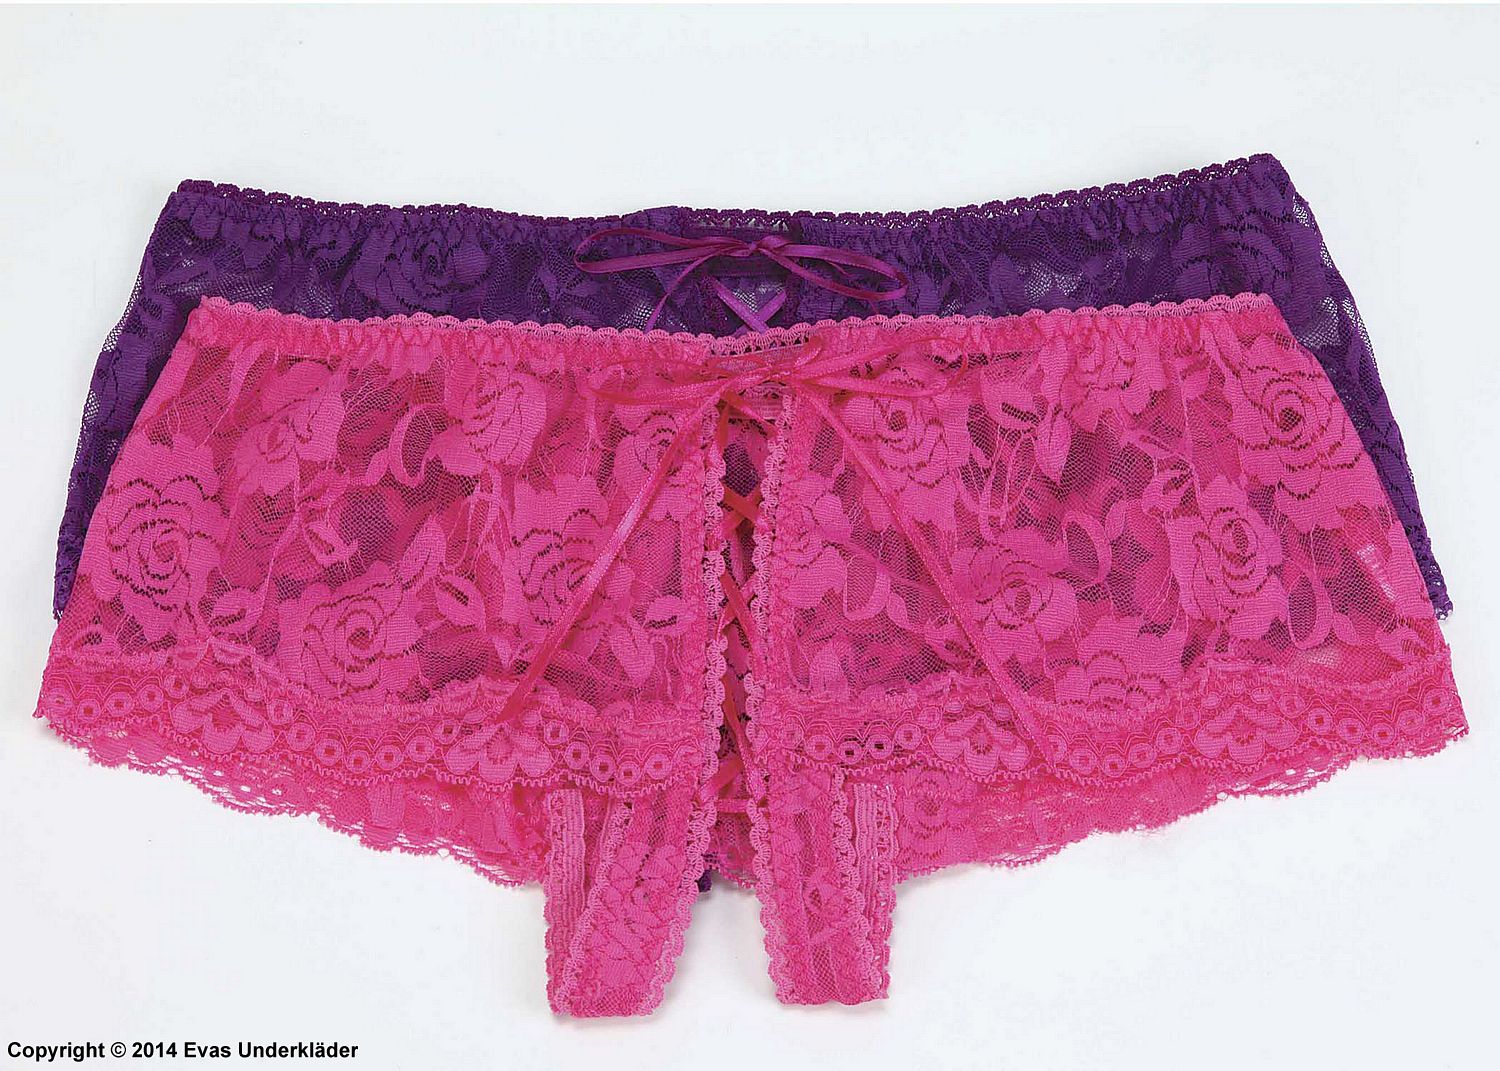 Stretch lace open front panty